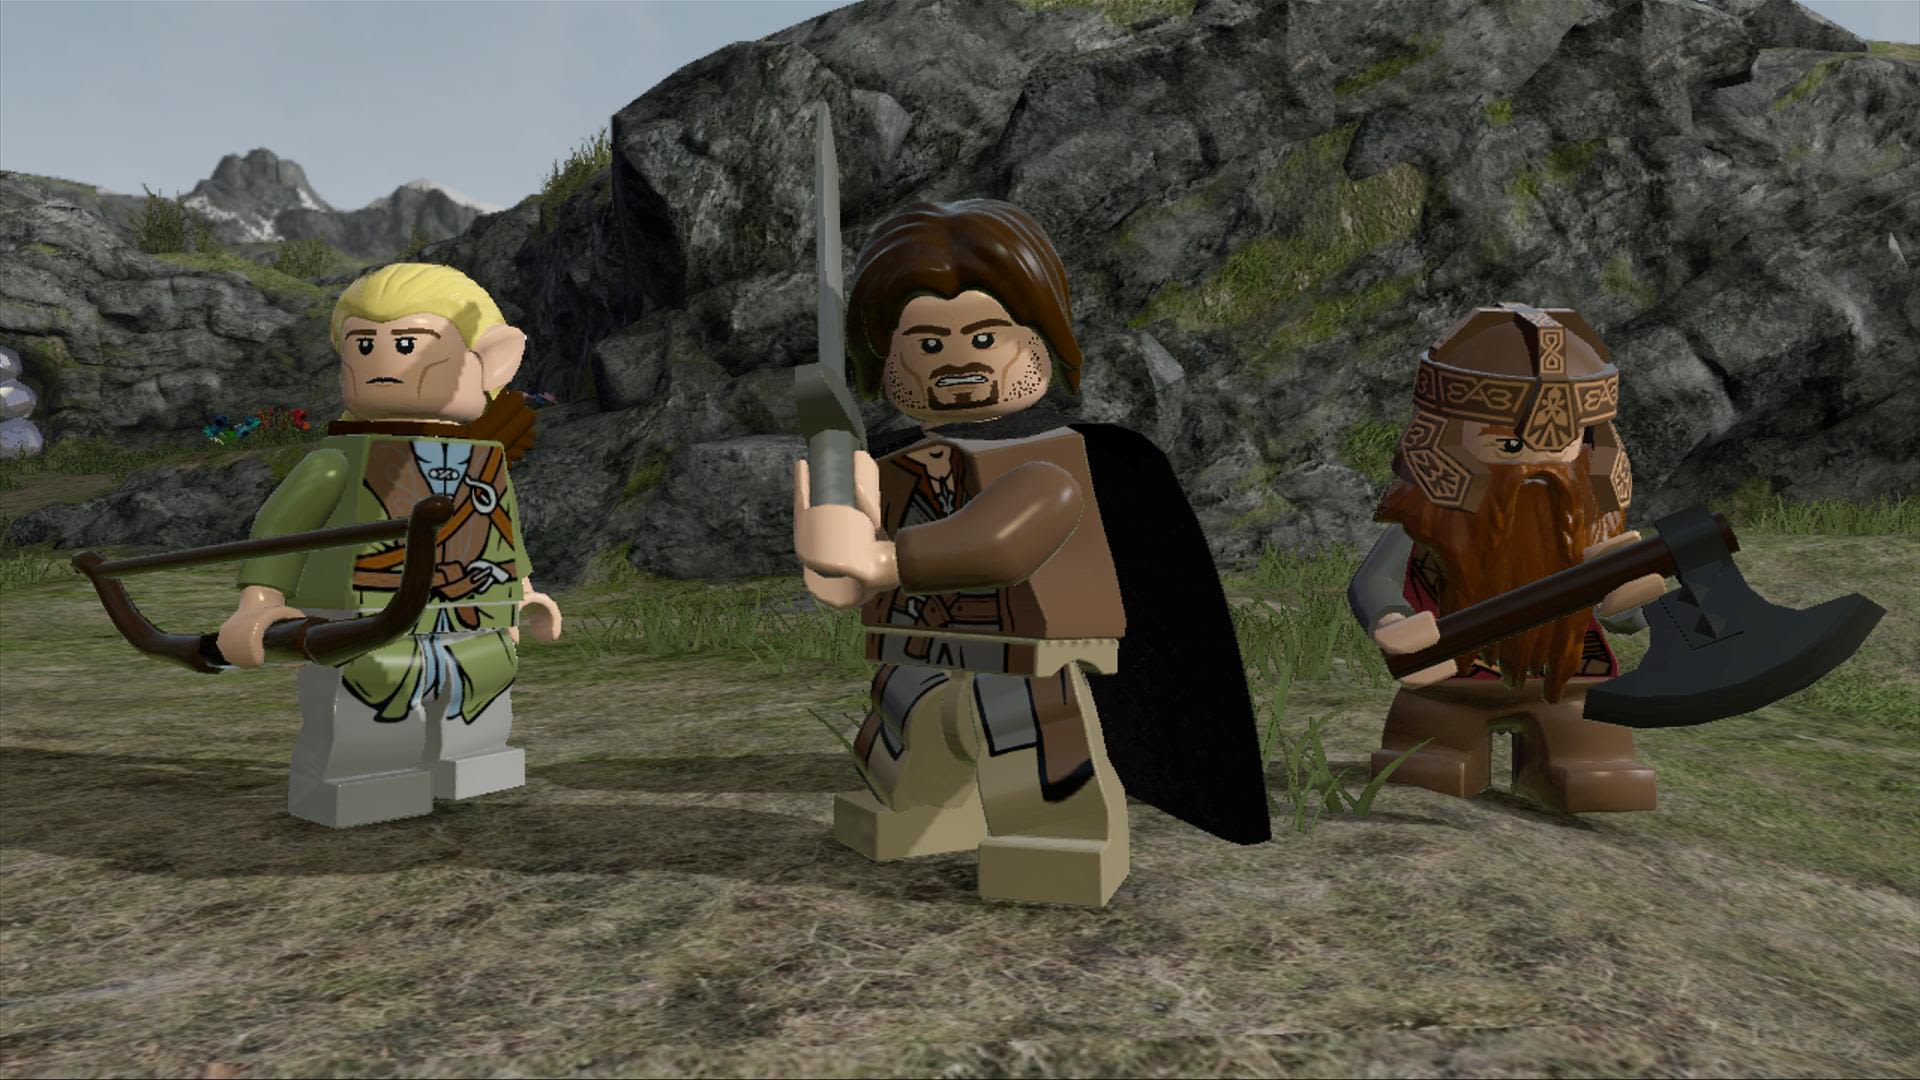 Lord of the Rings lines, as delivered by LEGO characters